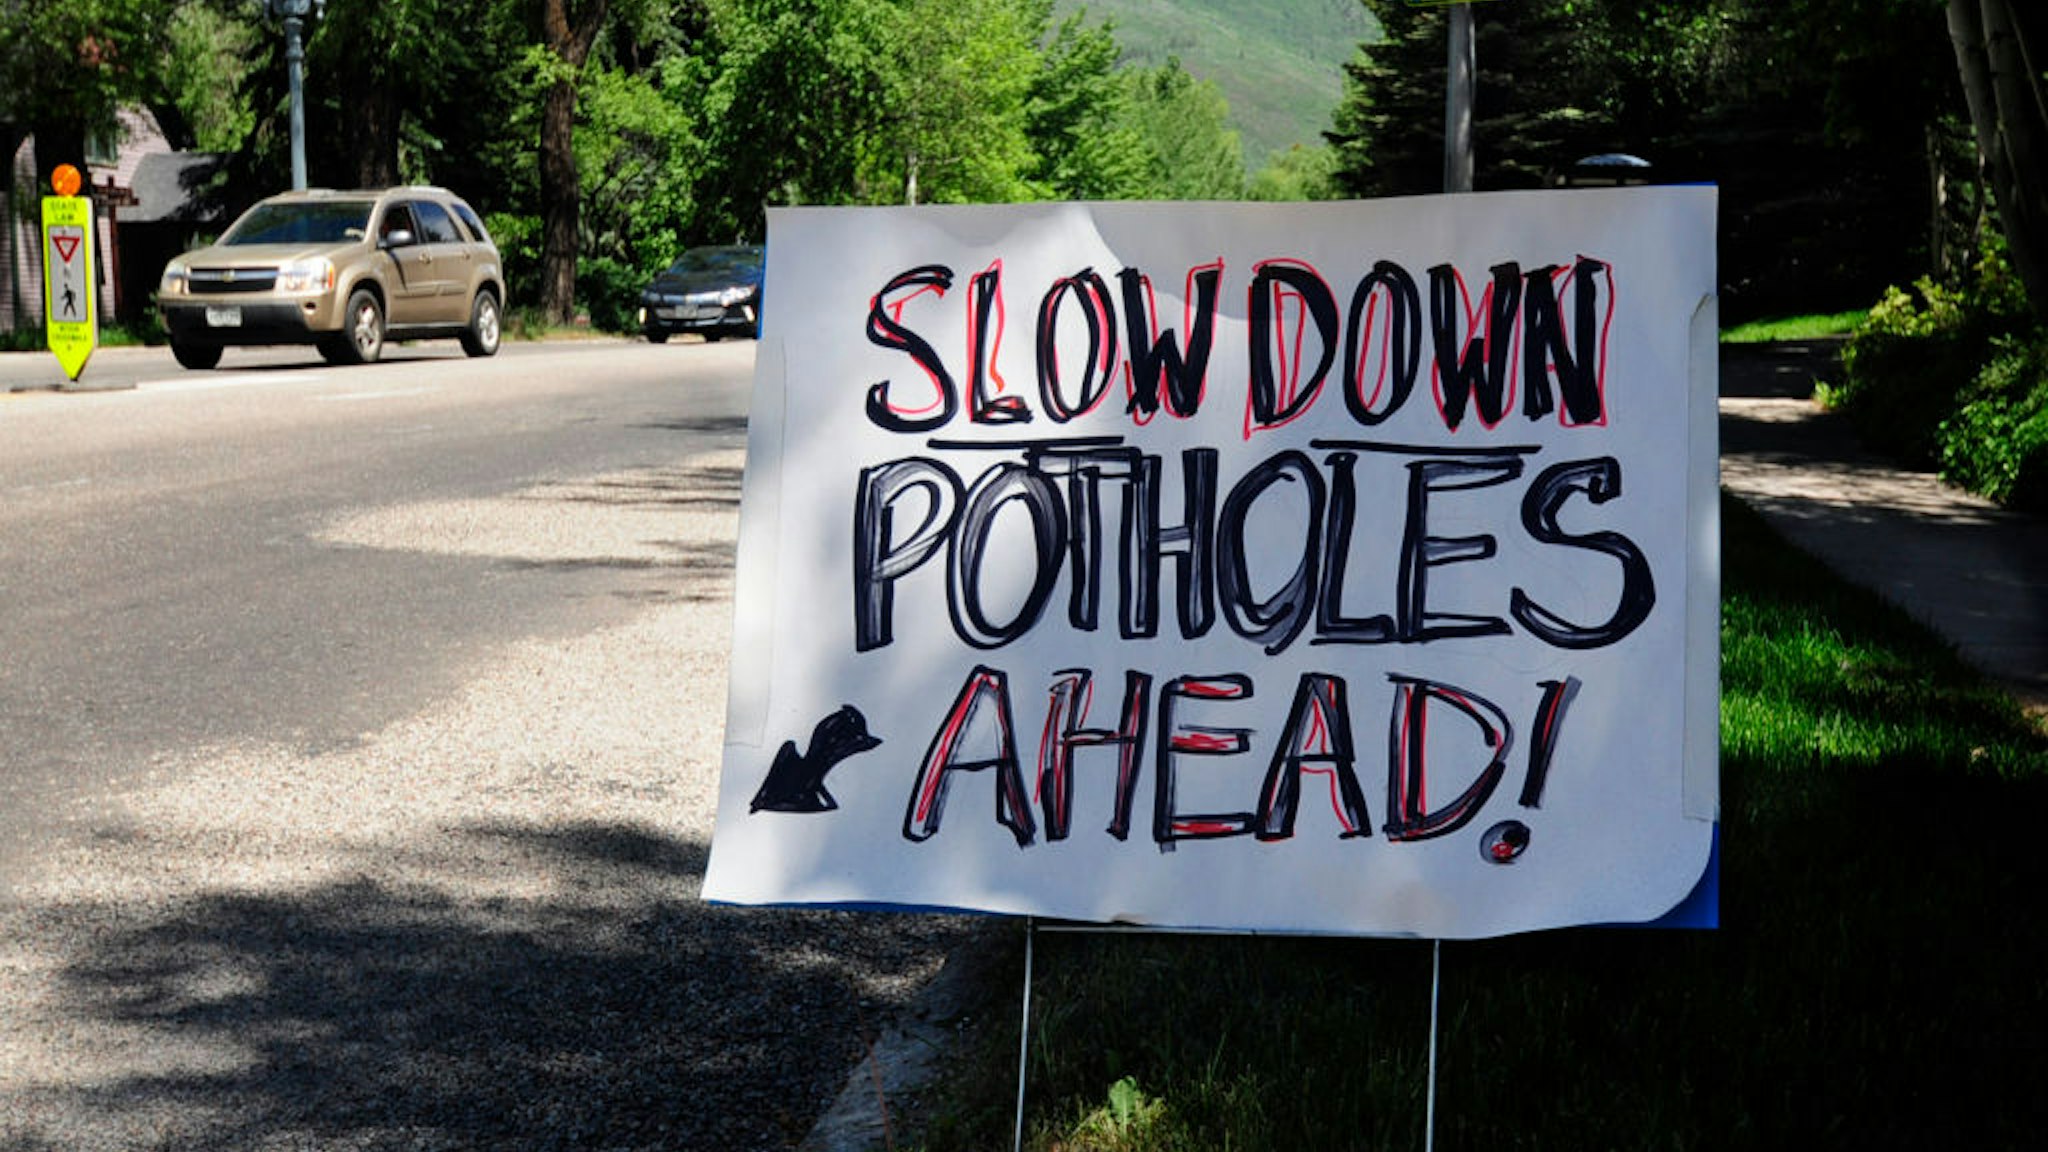 ASPEN, CO - JUNE 11, 2017: A hand-lettered, homemade sign posted beside an Aspen, Colorado, street warns motorists that there are pot holes ahead.